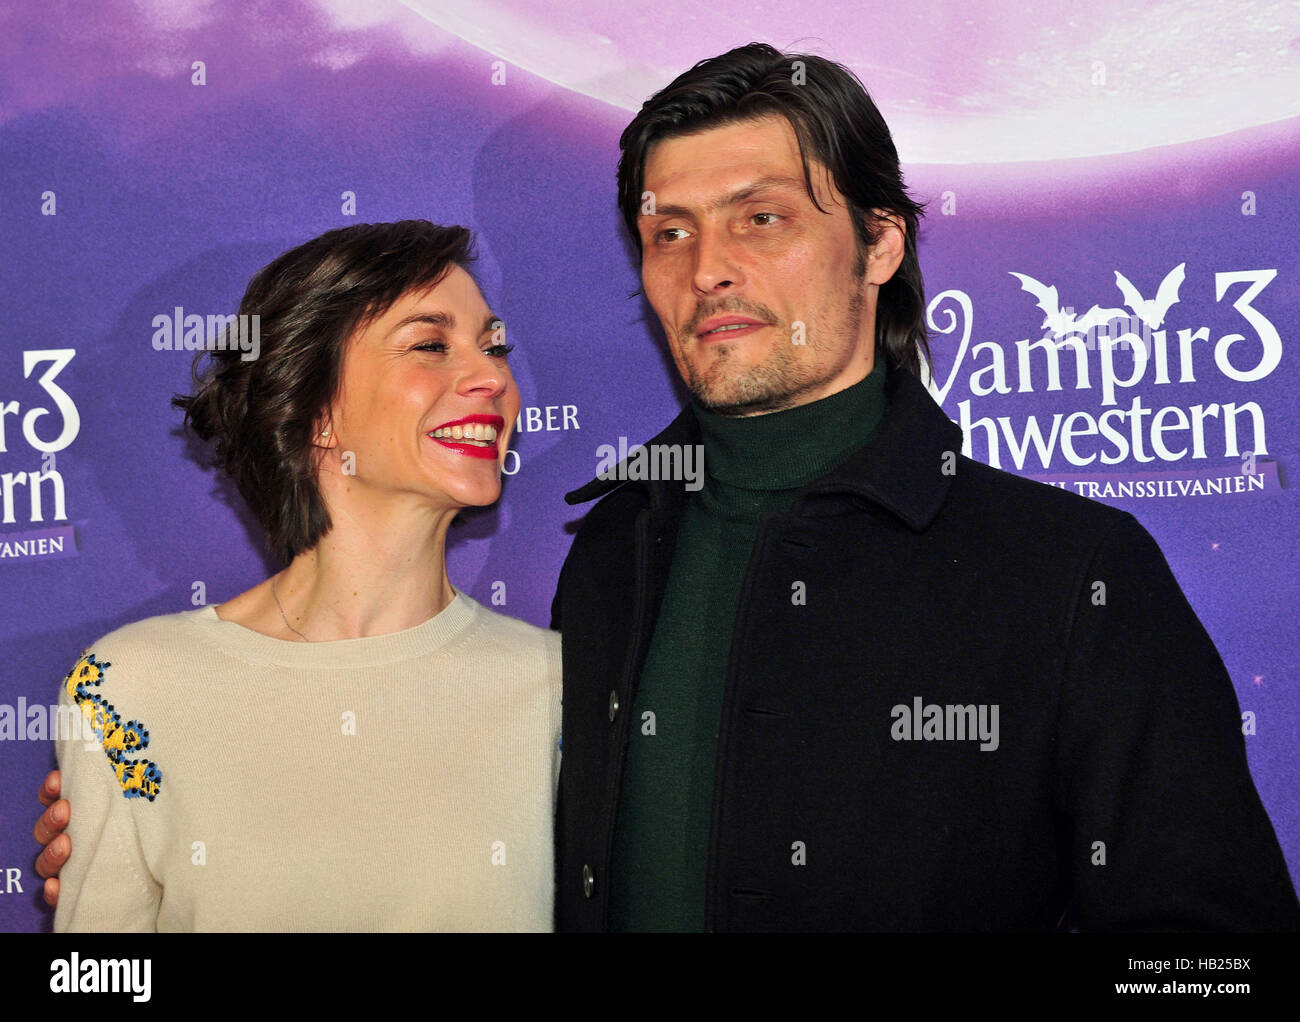 Munich, Germany. 4th Dec, 2016. Actors Christiane Paul and Stipe Erceg arrive for the premiere of 'Die Vampirschwester 3 - Reise nach Transsilvanien' (lit. 'The Vampire Sisters 3 - Journey to Transylvania') at Mathaeser Filmpalast in Munich, Germany, 4 December 2016. The fantasy comedy opens on 8 December 2016. Photo: Ursula Düren/dpa/Alamy Live News Stock Photo